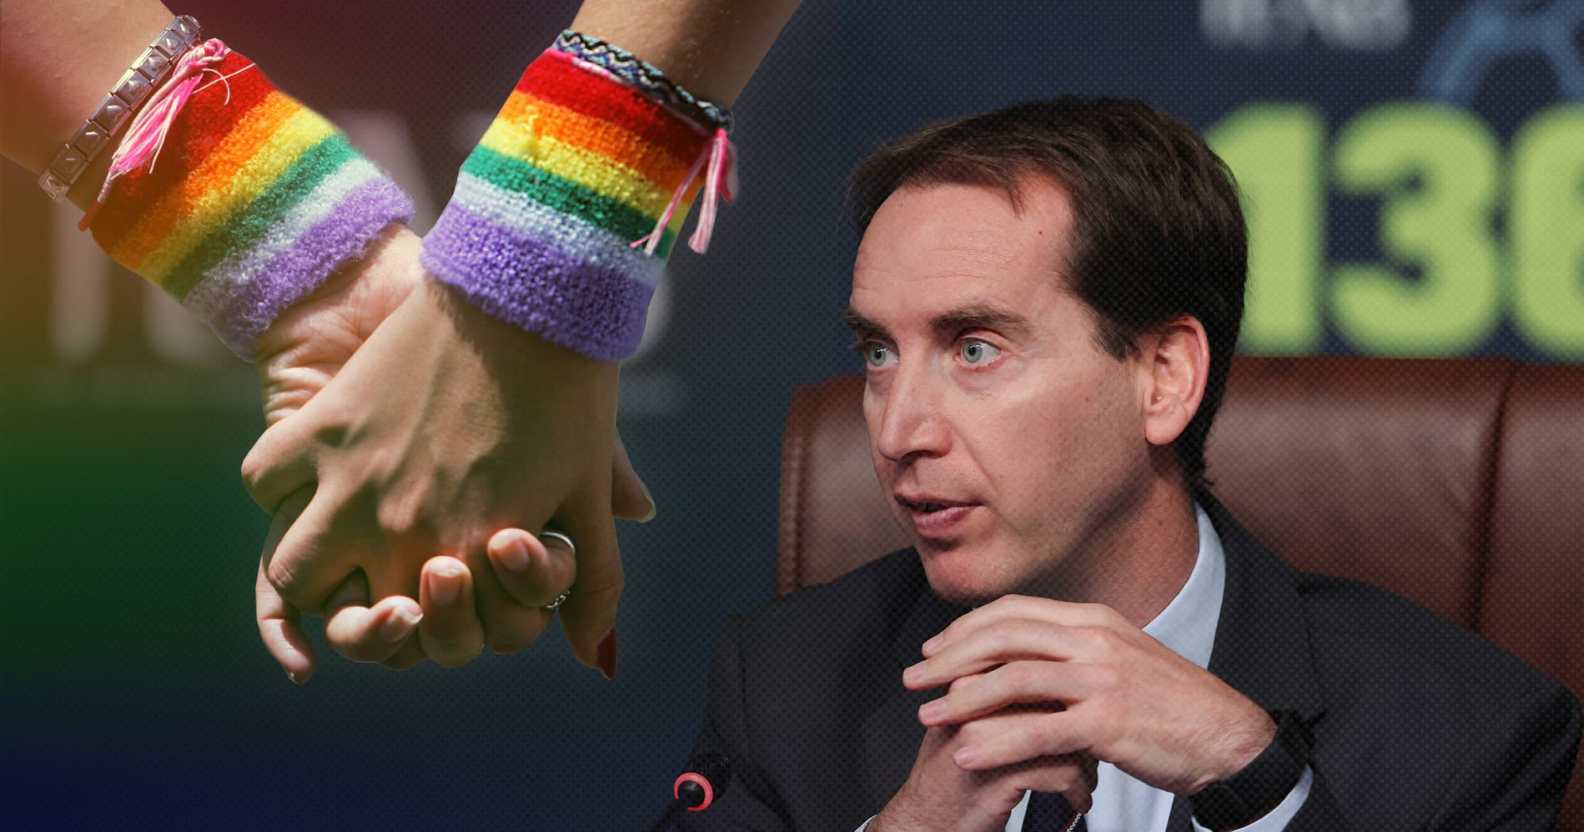 An image of two people holding hands with rainbow coloured wrist decoration and the boss of the UK Football Association.